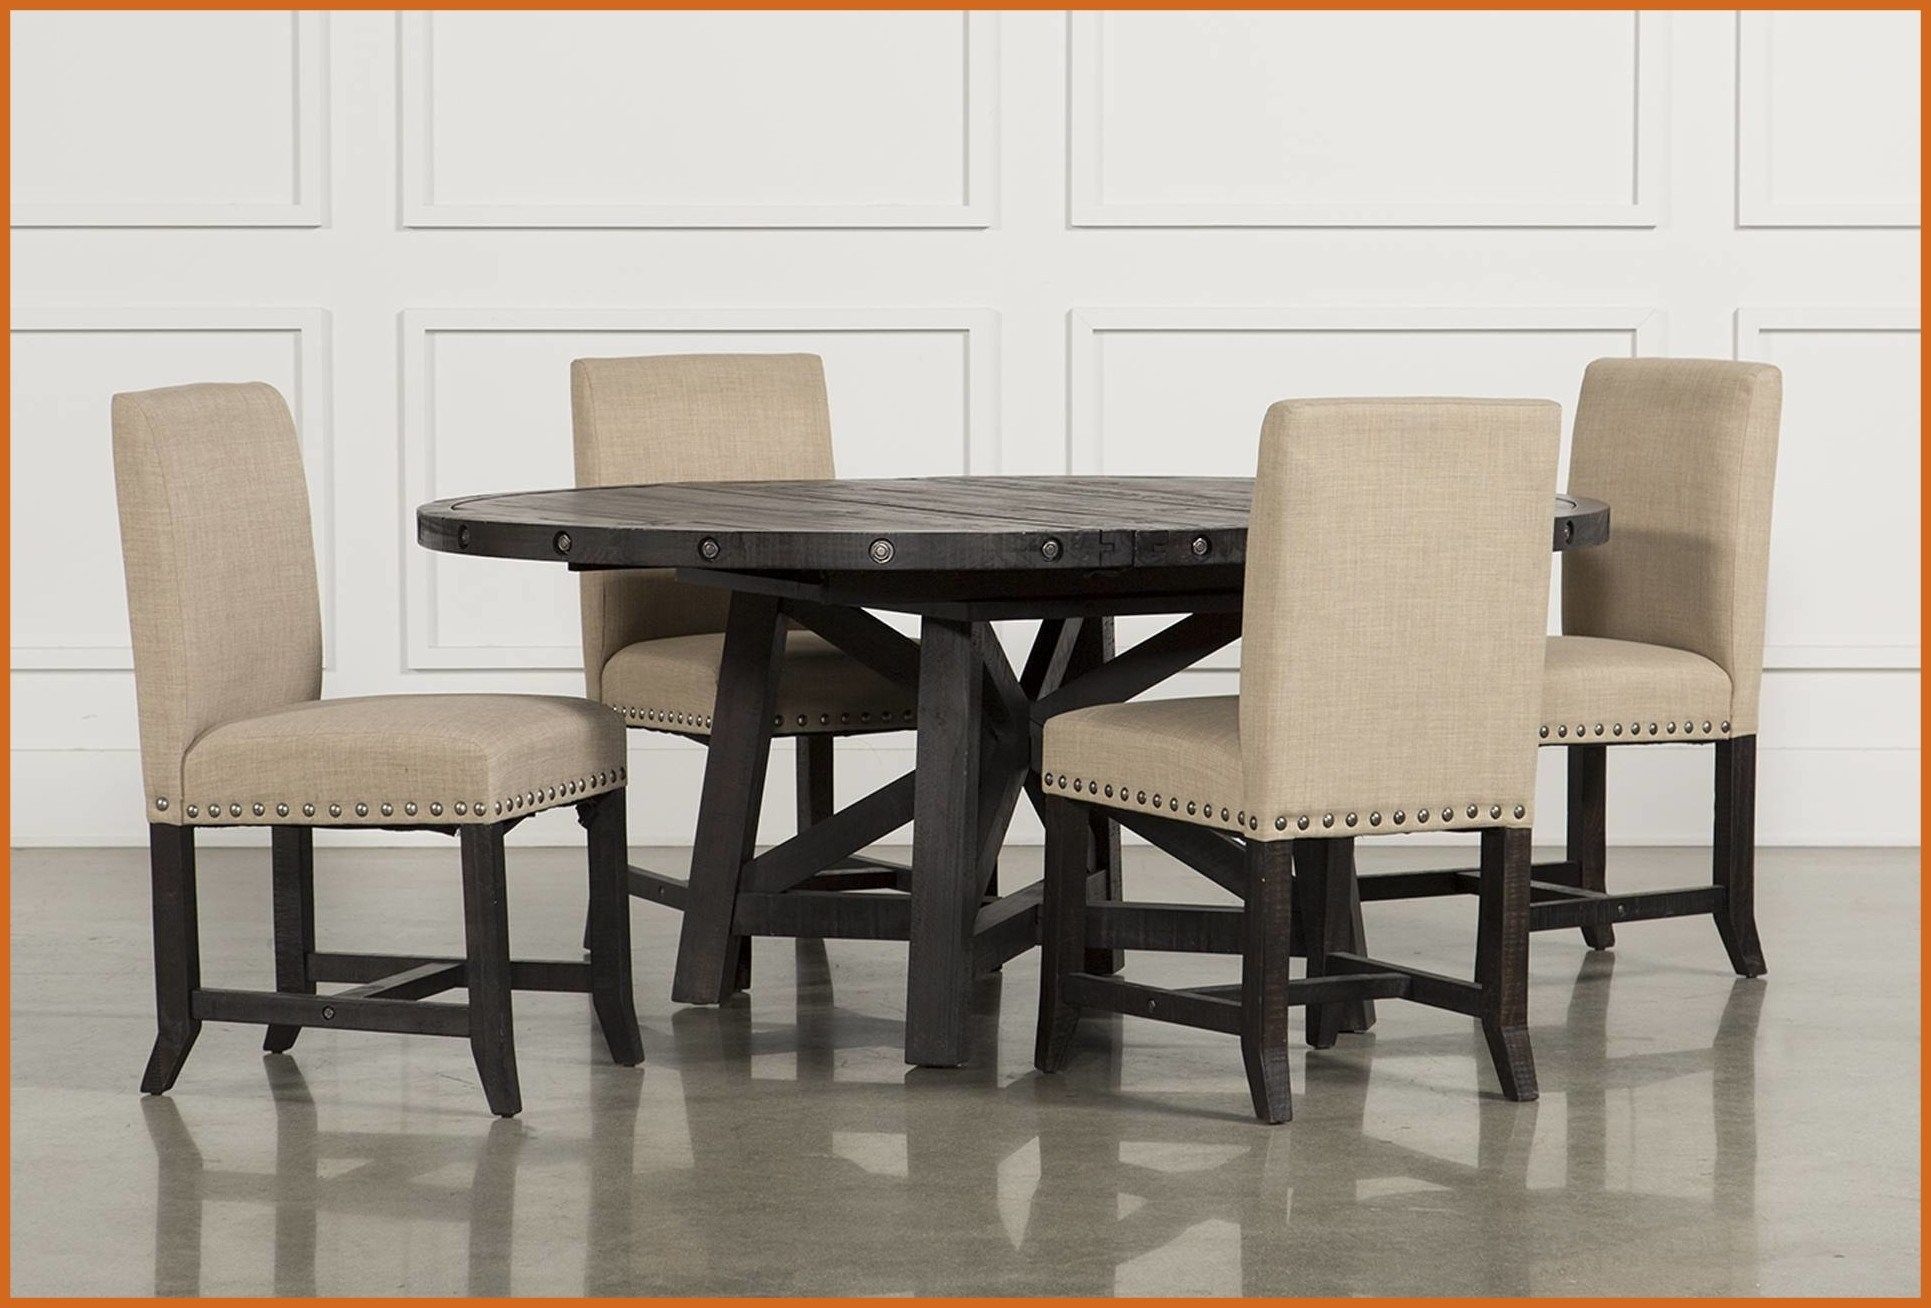 2019 Latest Jaxon Grey Round Extension Dining Tables Intended For Preferred Pratiksha Sonoma 5 Piece Dining Sets (View 10 of 20)